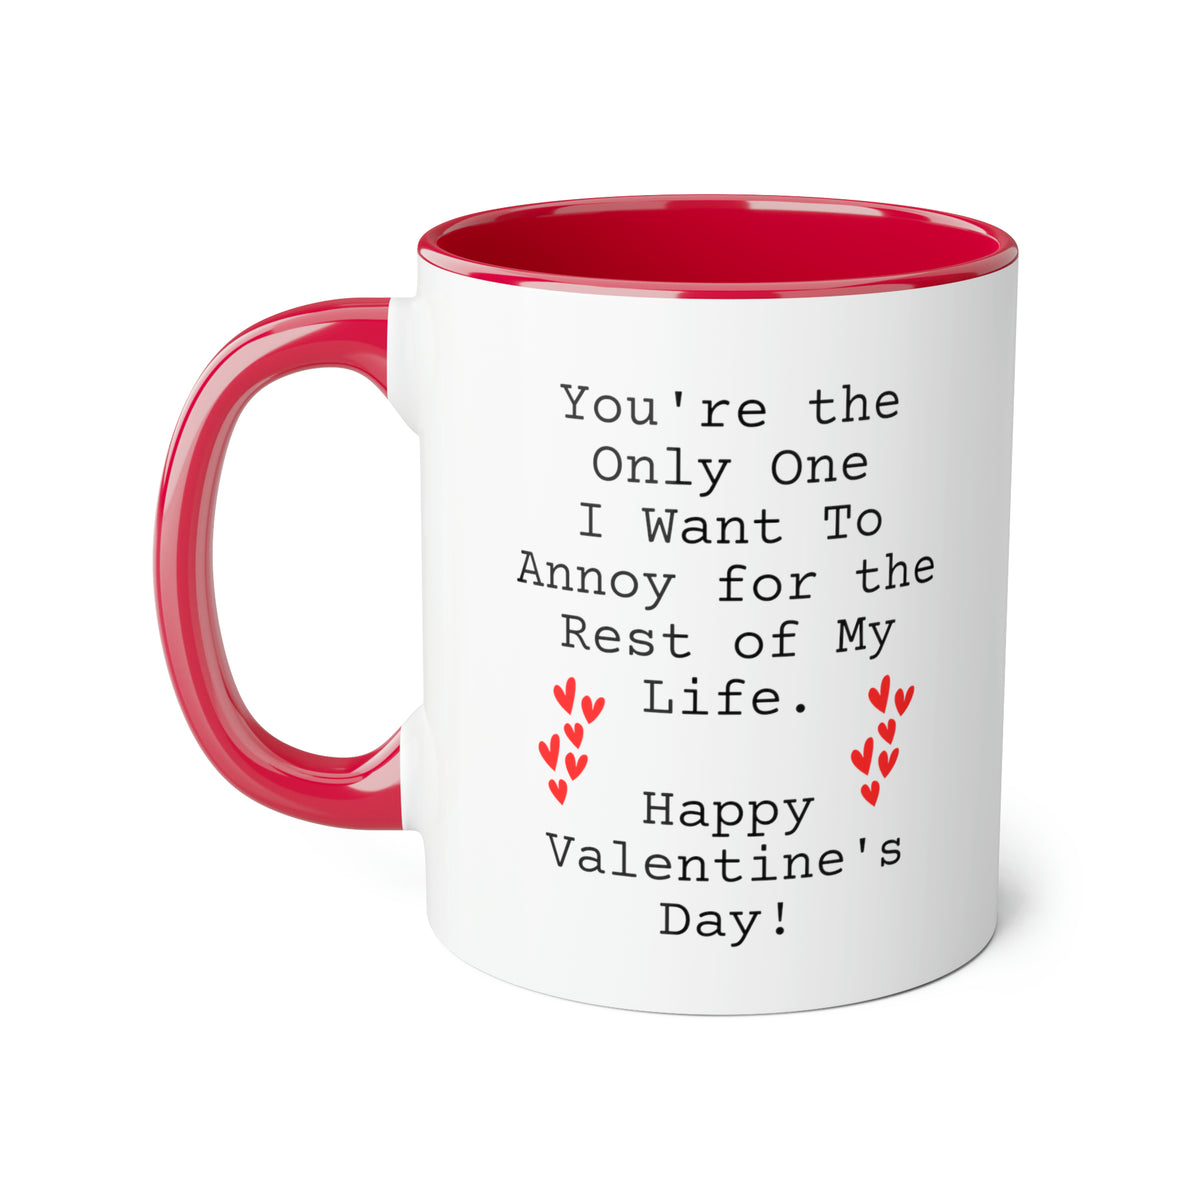 Valentins Day Mug, You're the Only One I want To Annoy for the Rest of My Life, Funny For Him Her, Coffee Cup For Wife Husband